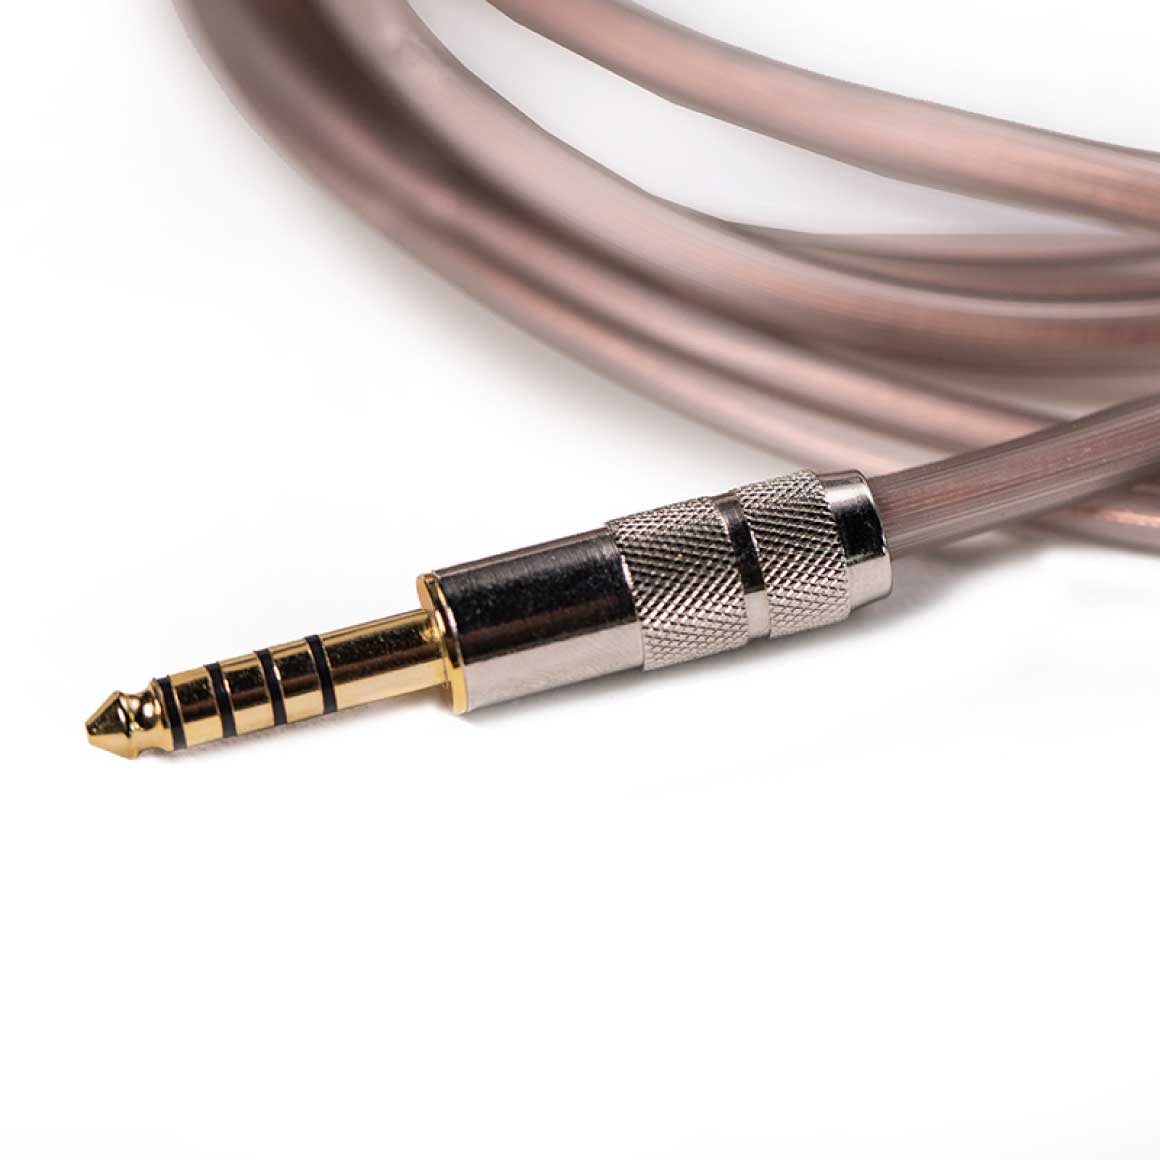 HiFiMAN - 3.5mm to 4.4mm Balanced Cable (Unboxed)